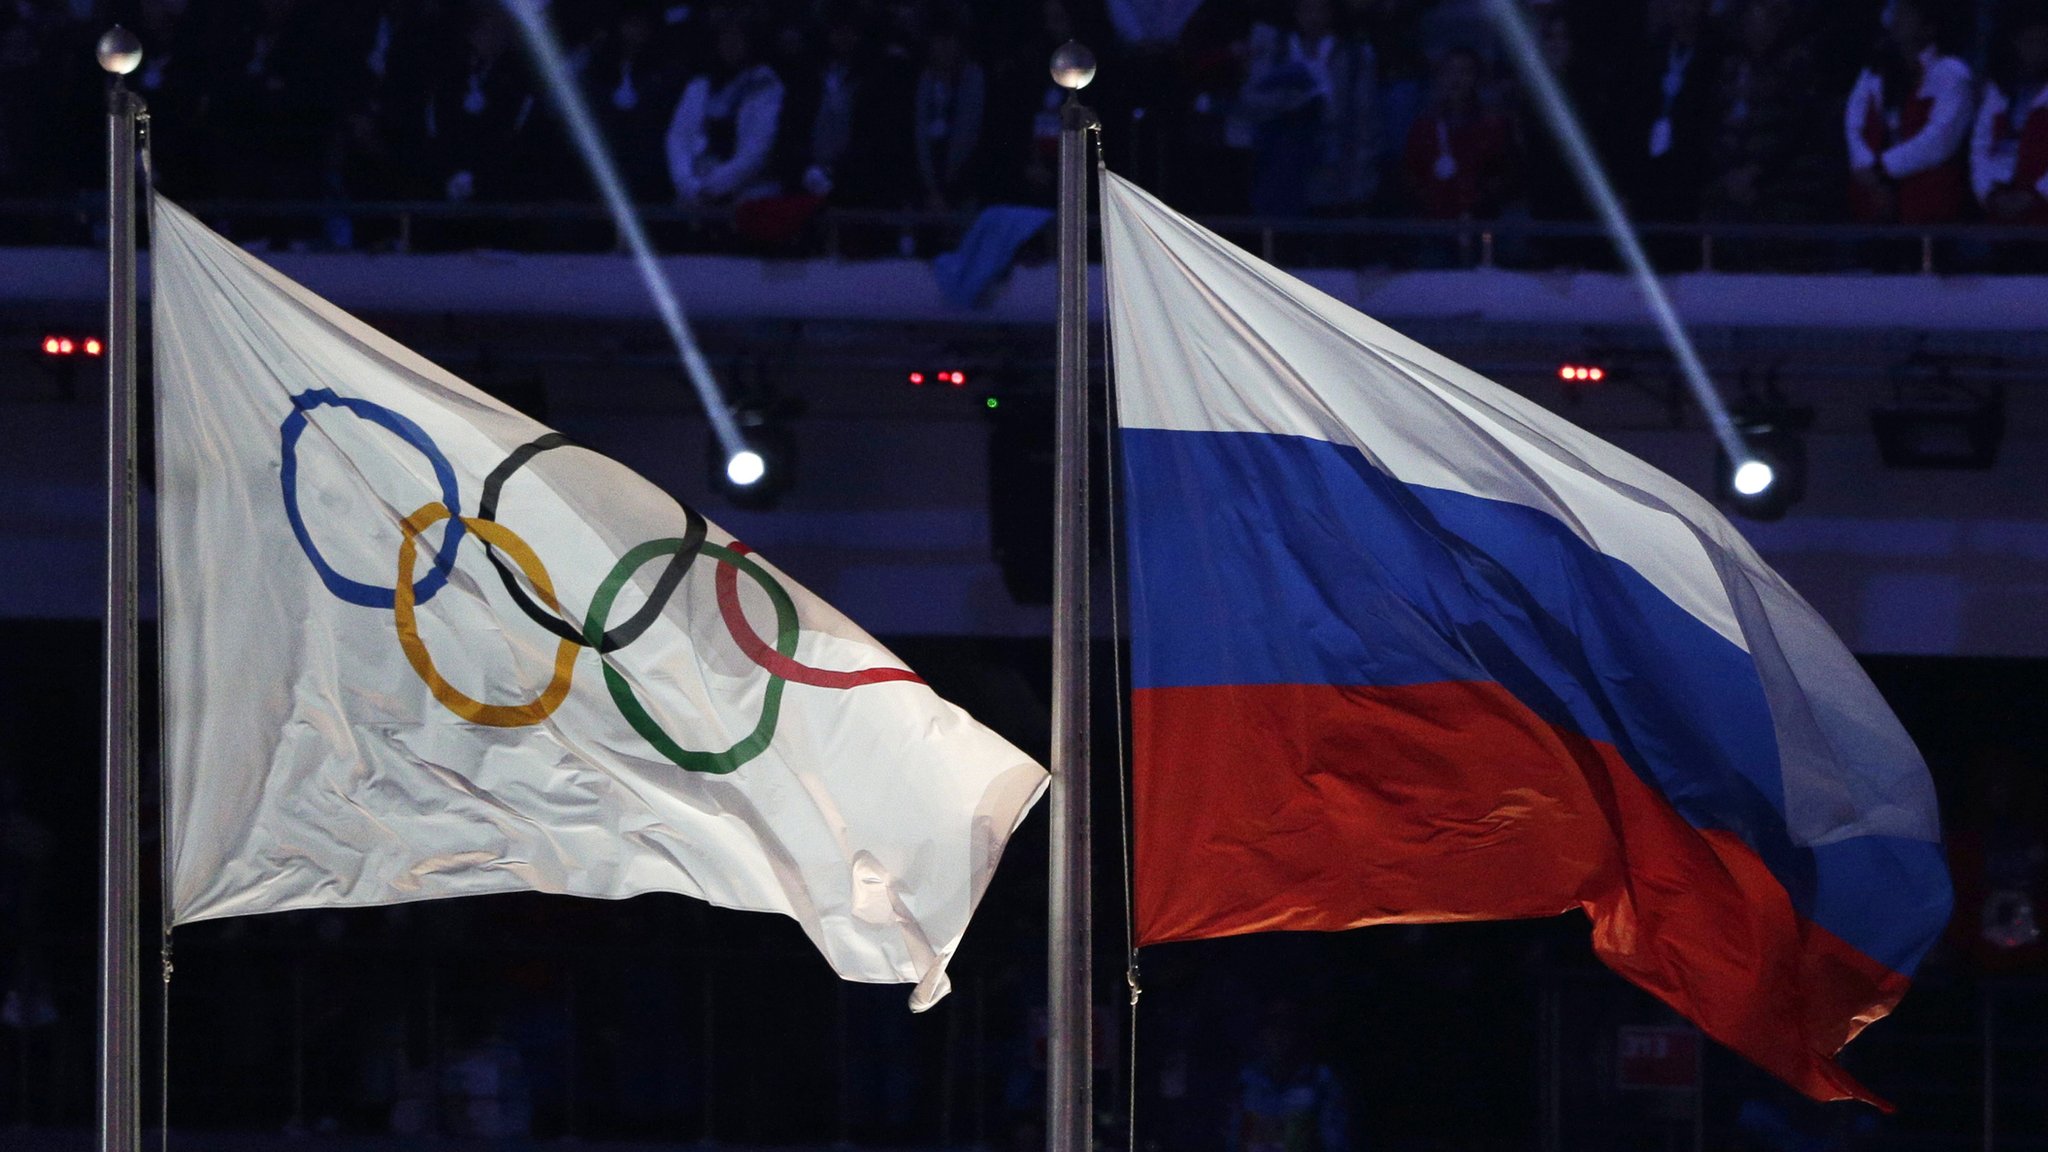 Russian doping: Olympic chiefs to decide on sanctions after McLaren report